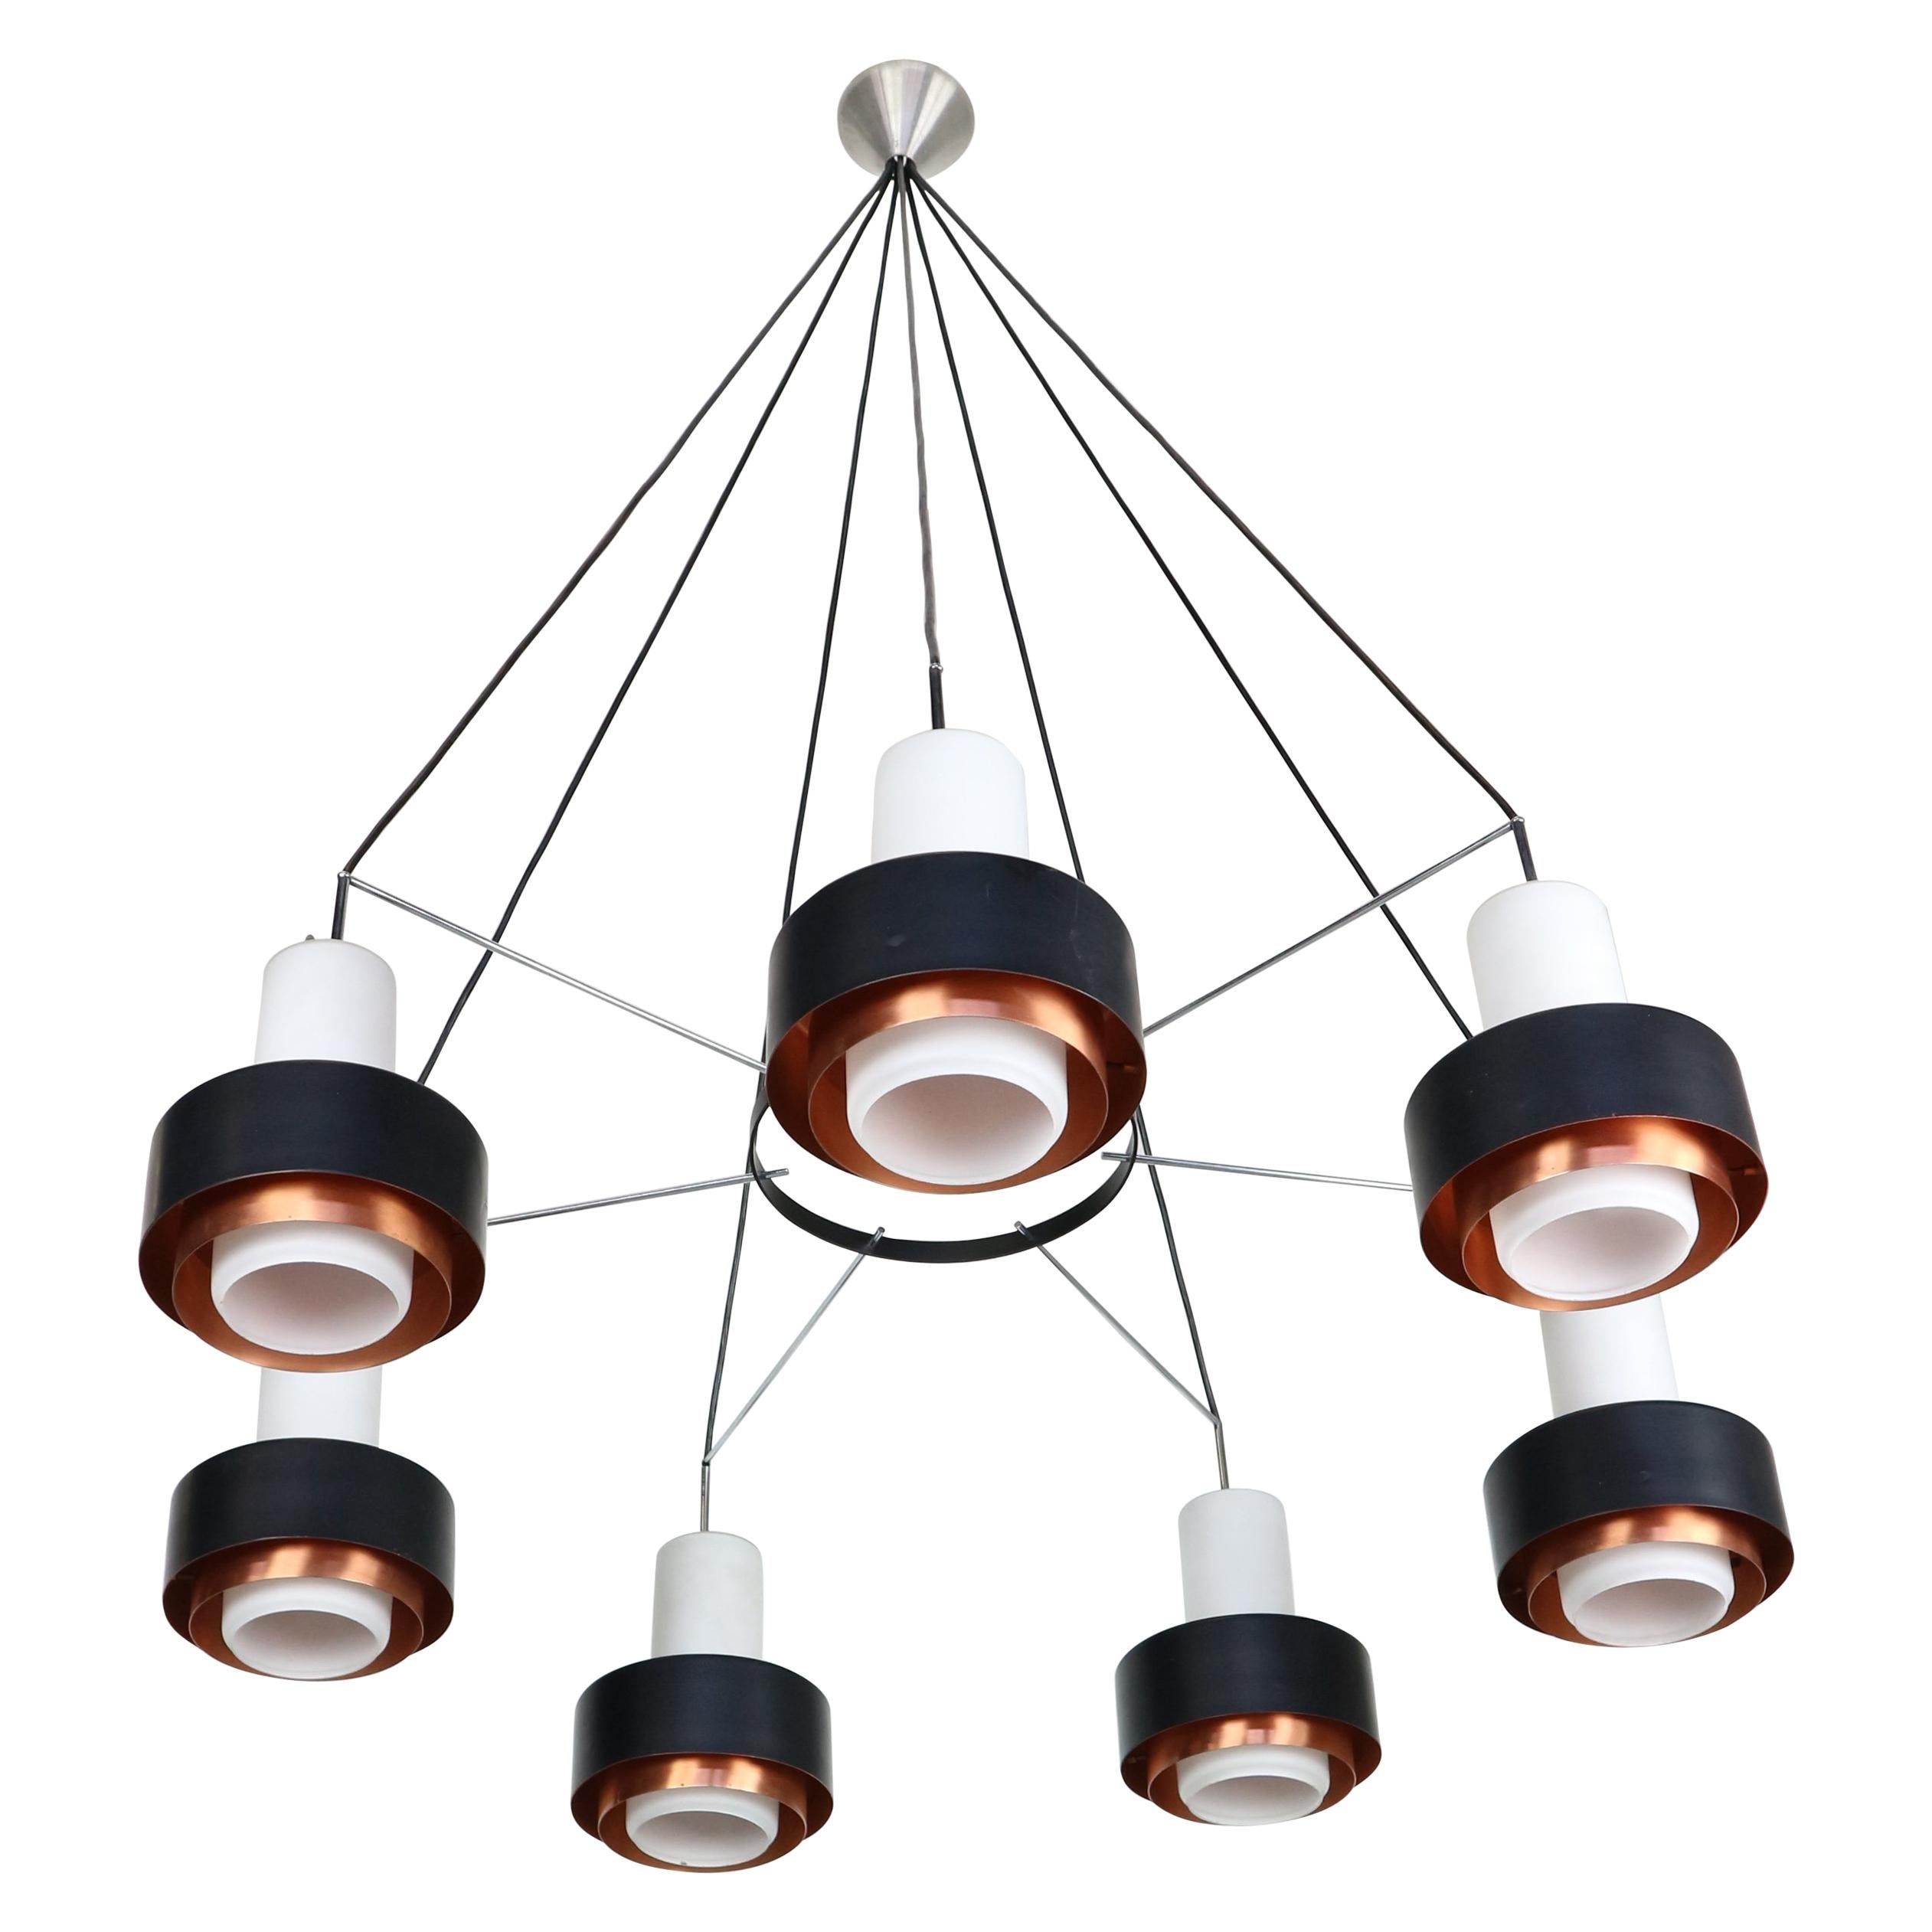 Set of two large chandelier pendant. Chrome, black metal, copper and opaline glass. The seven shades are 20 cm in diameter. Real eye-catcher, two of the same lamps in one set.